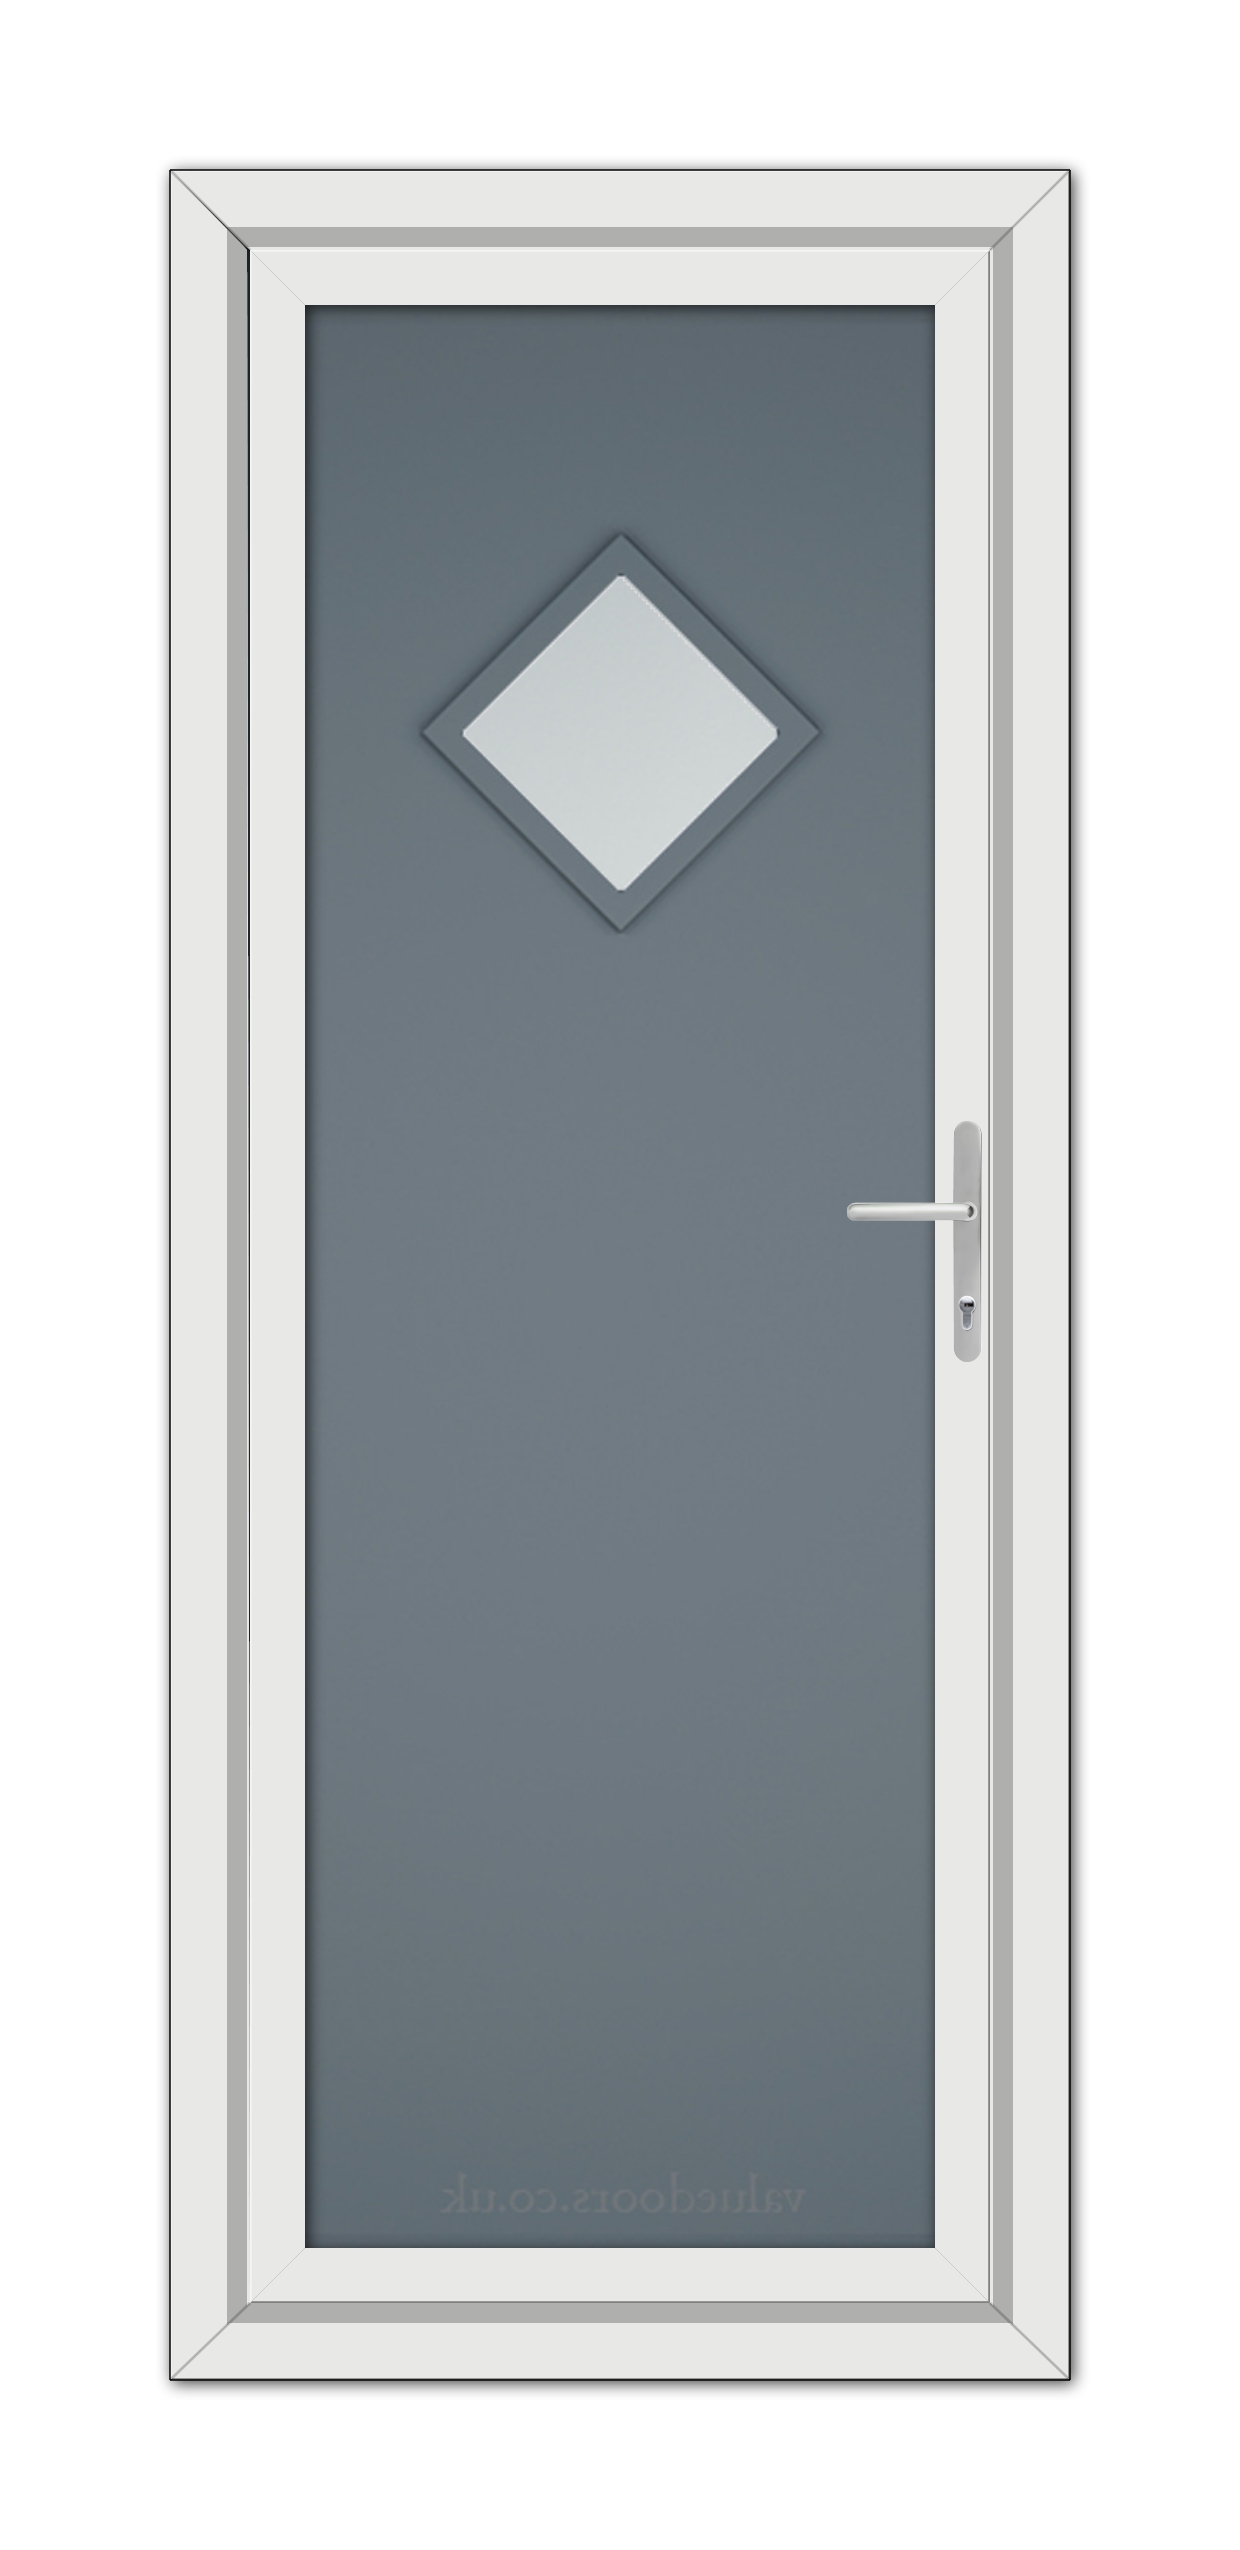 Slate Grey Modern 5131 uPVC door with a white frame, featuring a silver handle and a diamond-shaped window at the top.